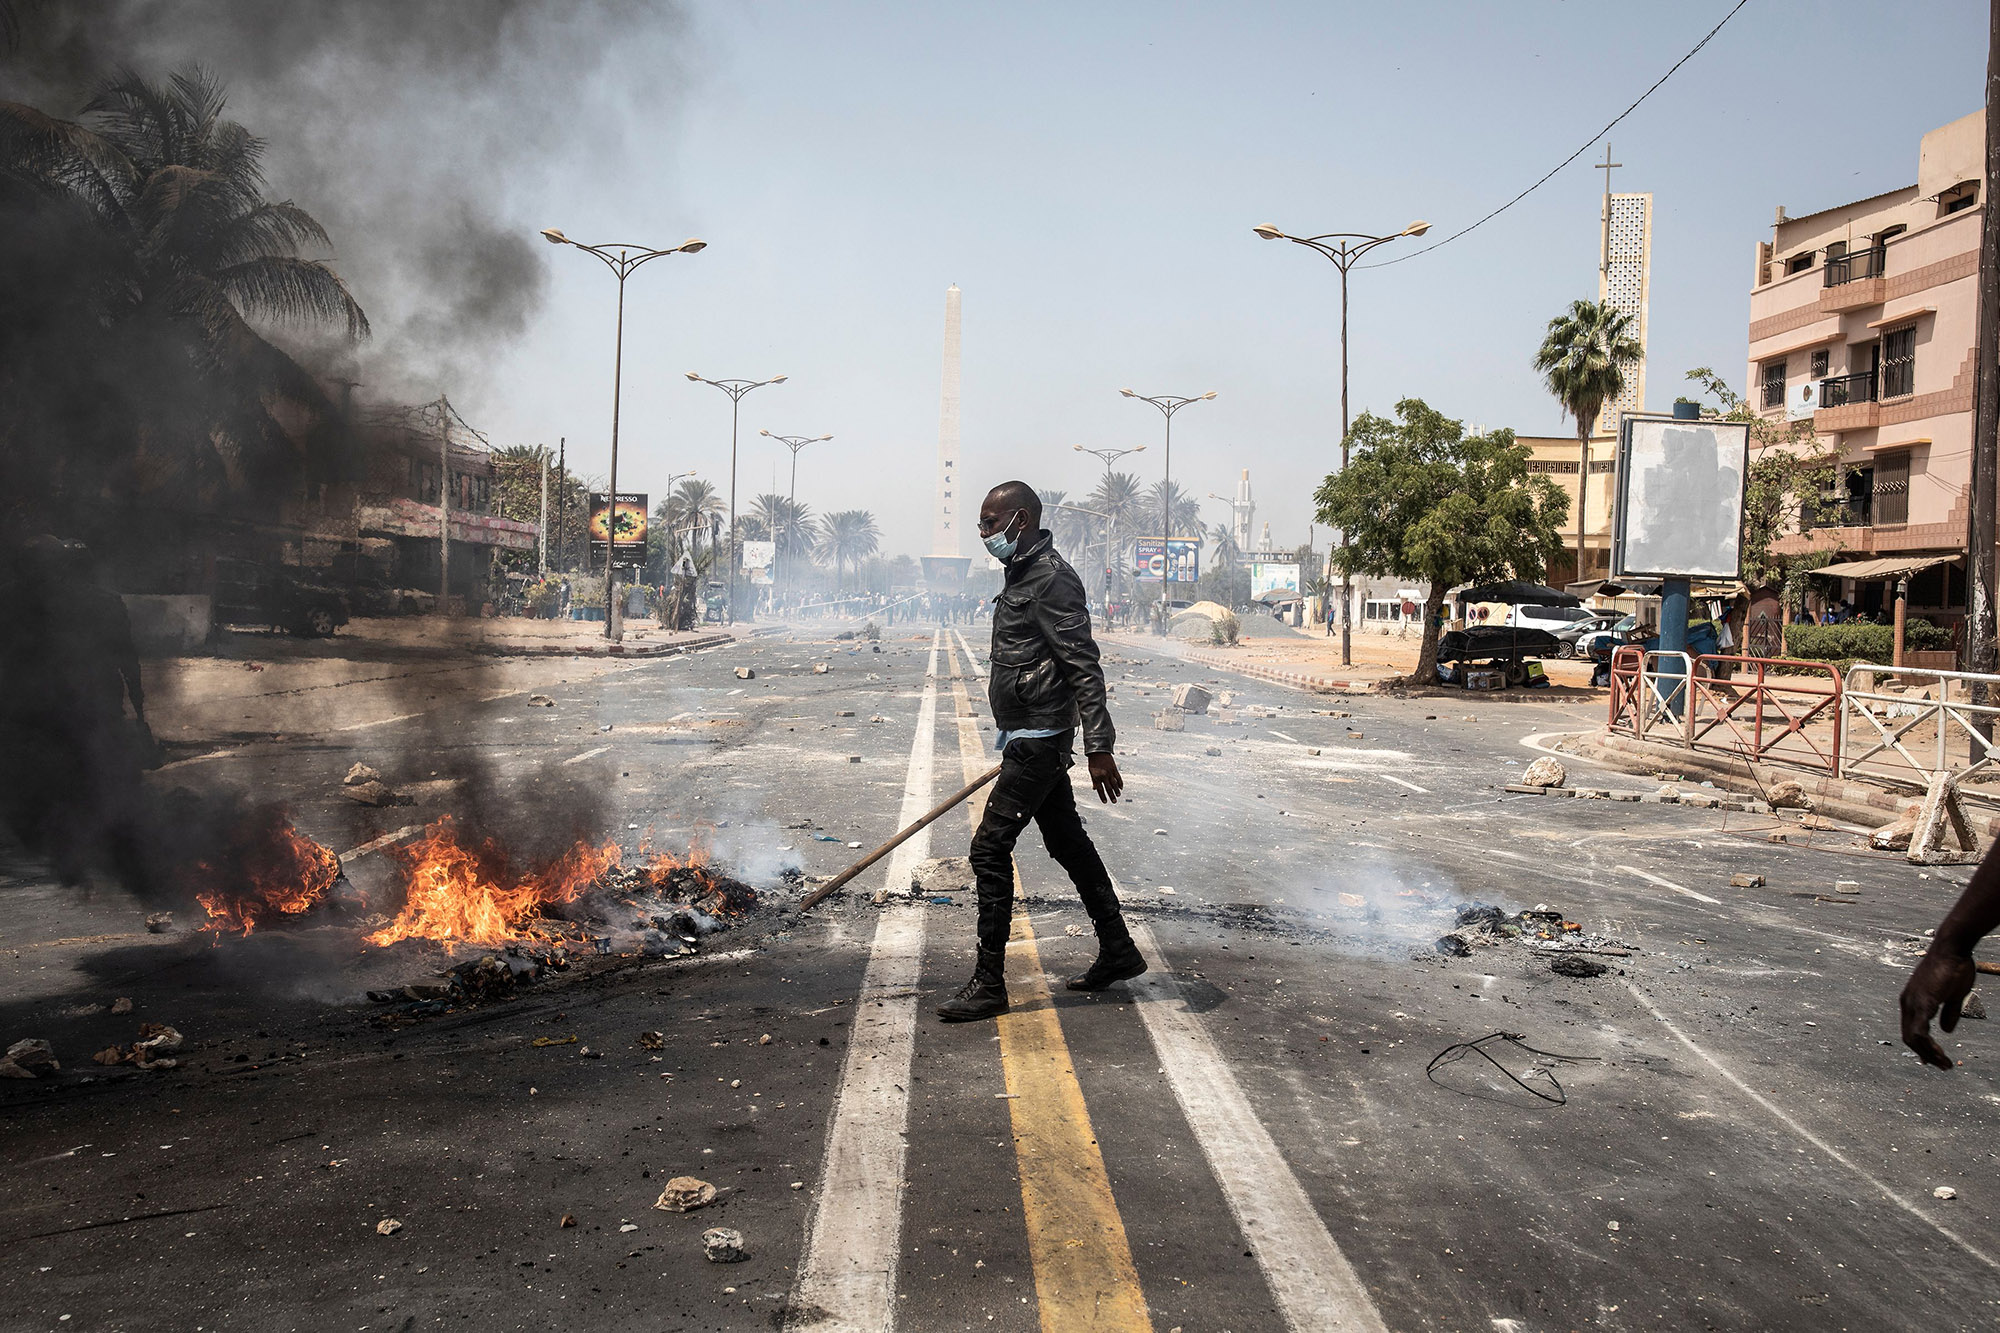 A police officer clears away a fire after violent protests broke out in Dakar, March 3.